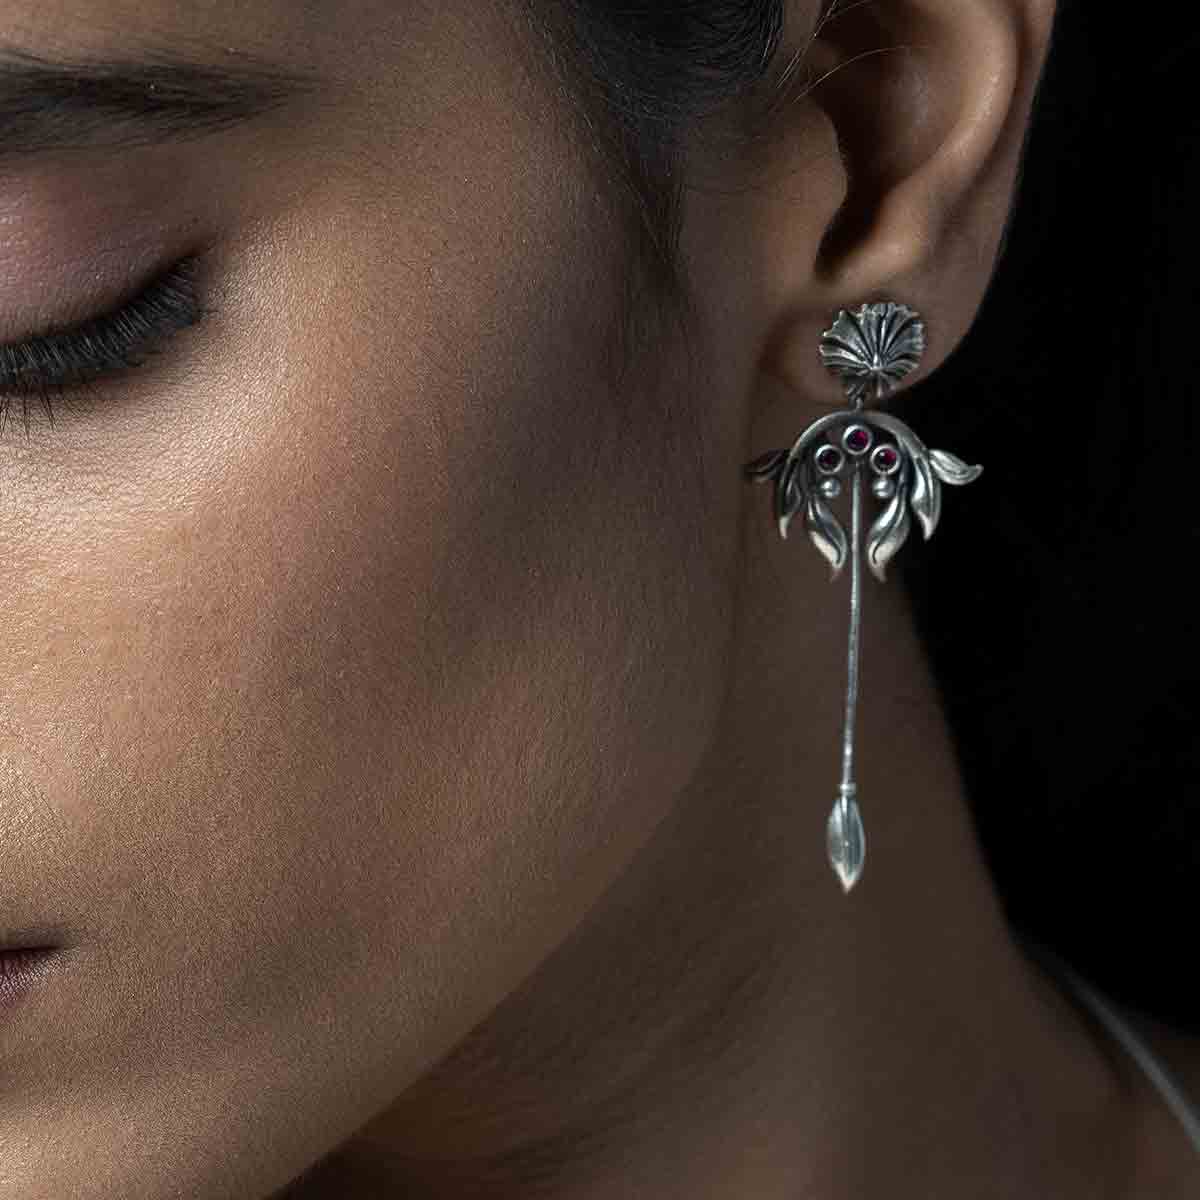 William Morris - Stem Lilly Silver Dangling Earrings by Moha